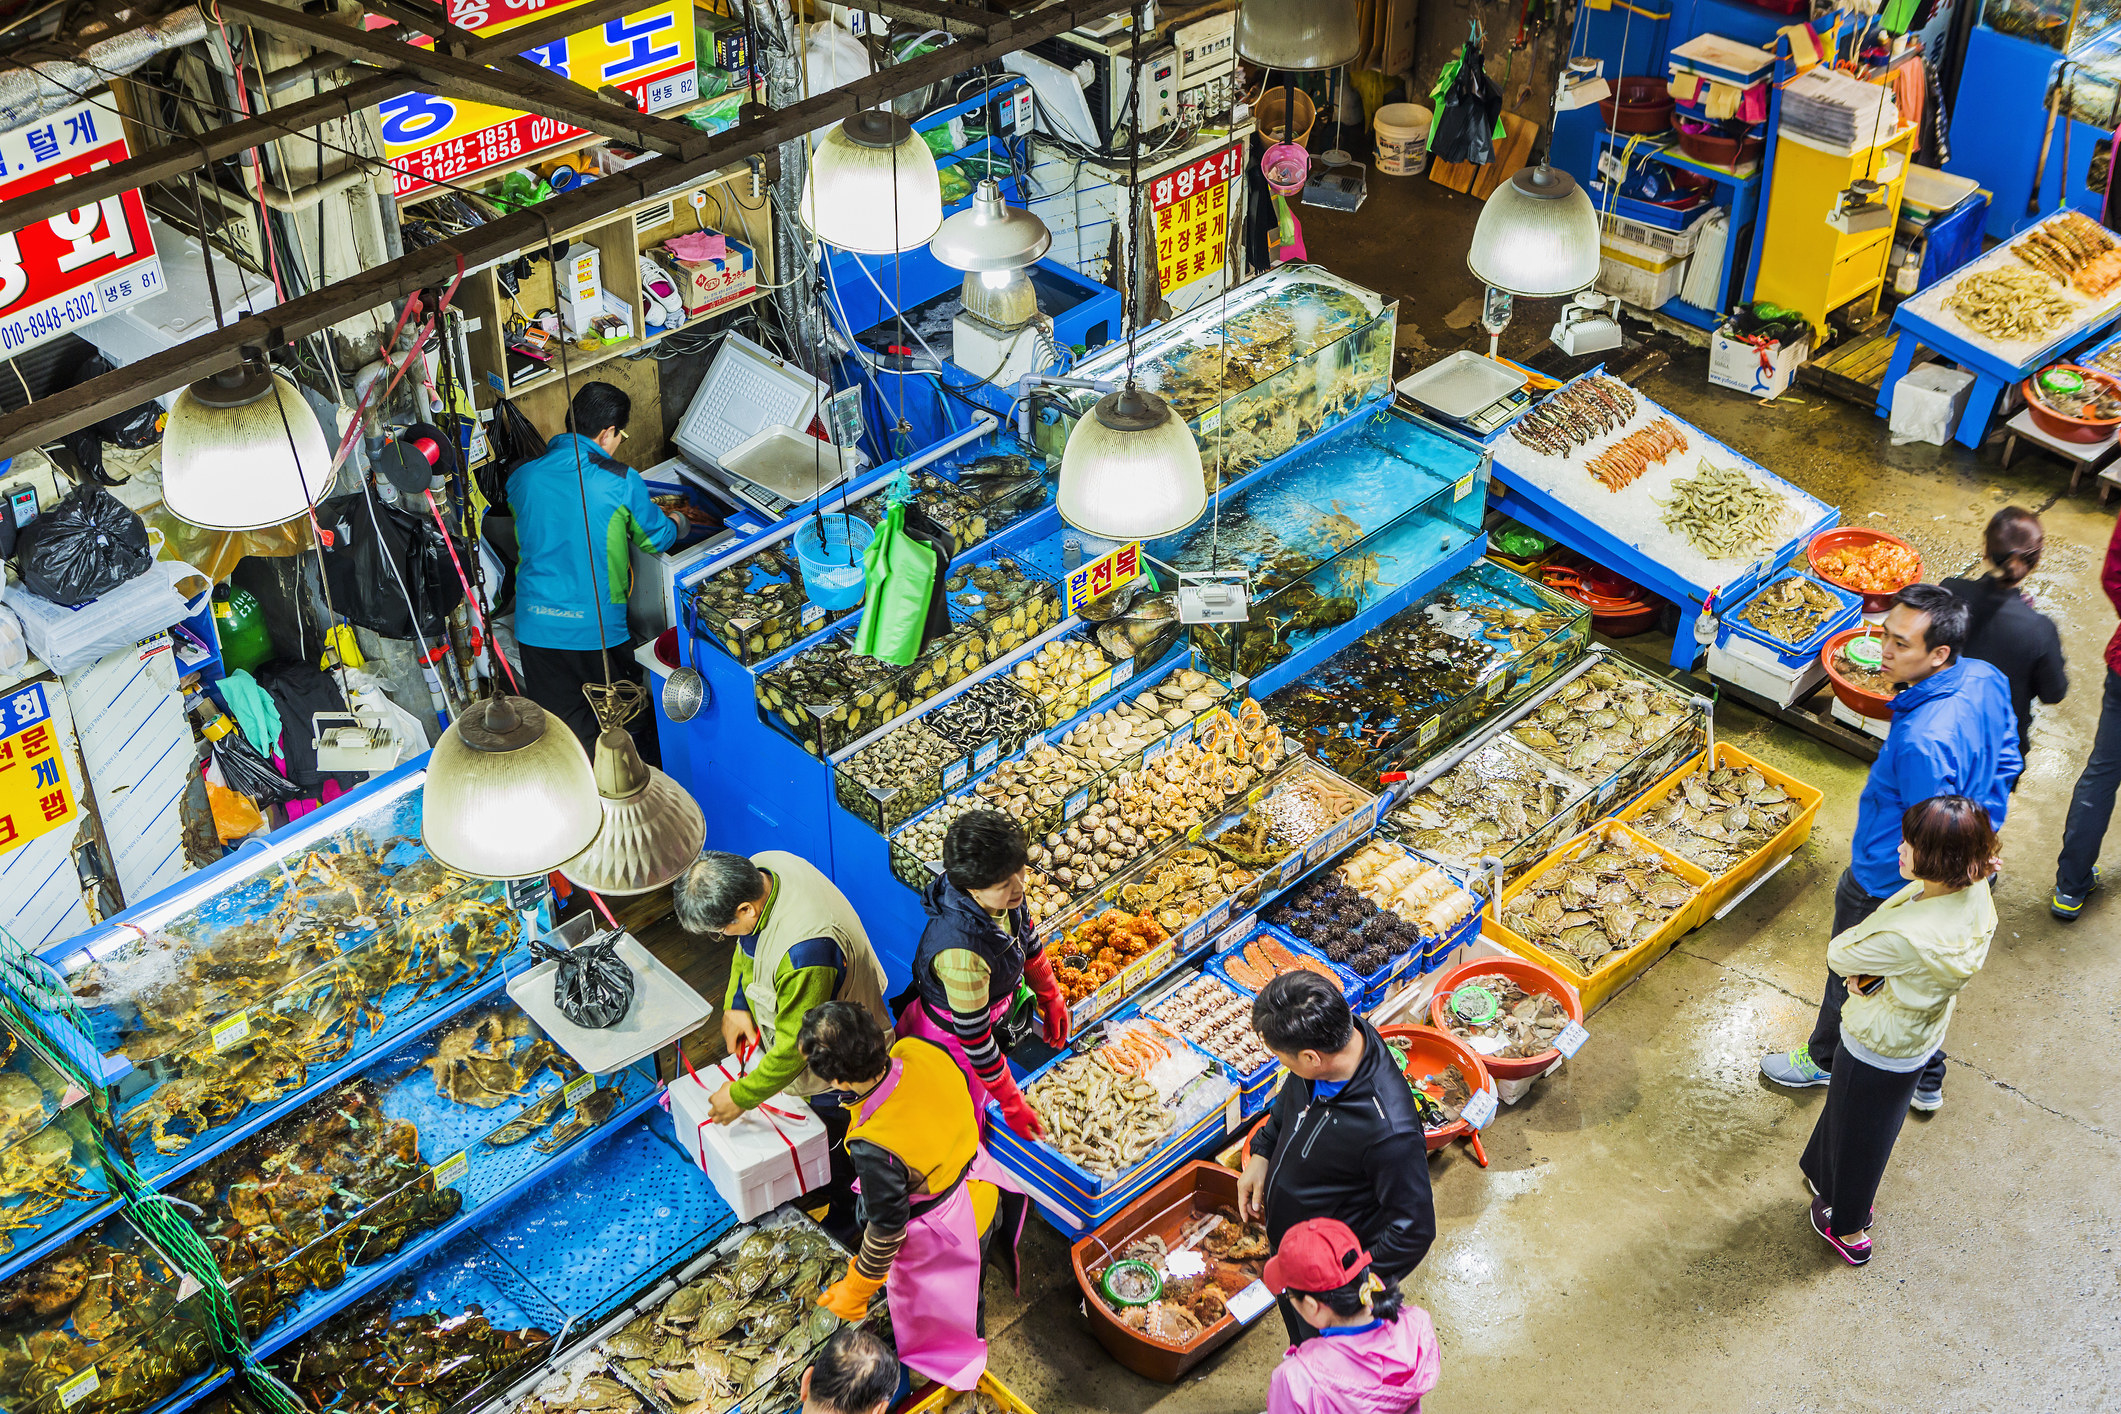 People shopping in a large fish market